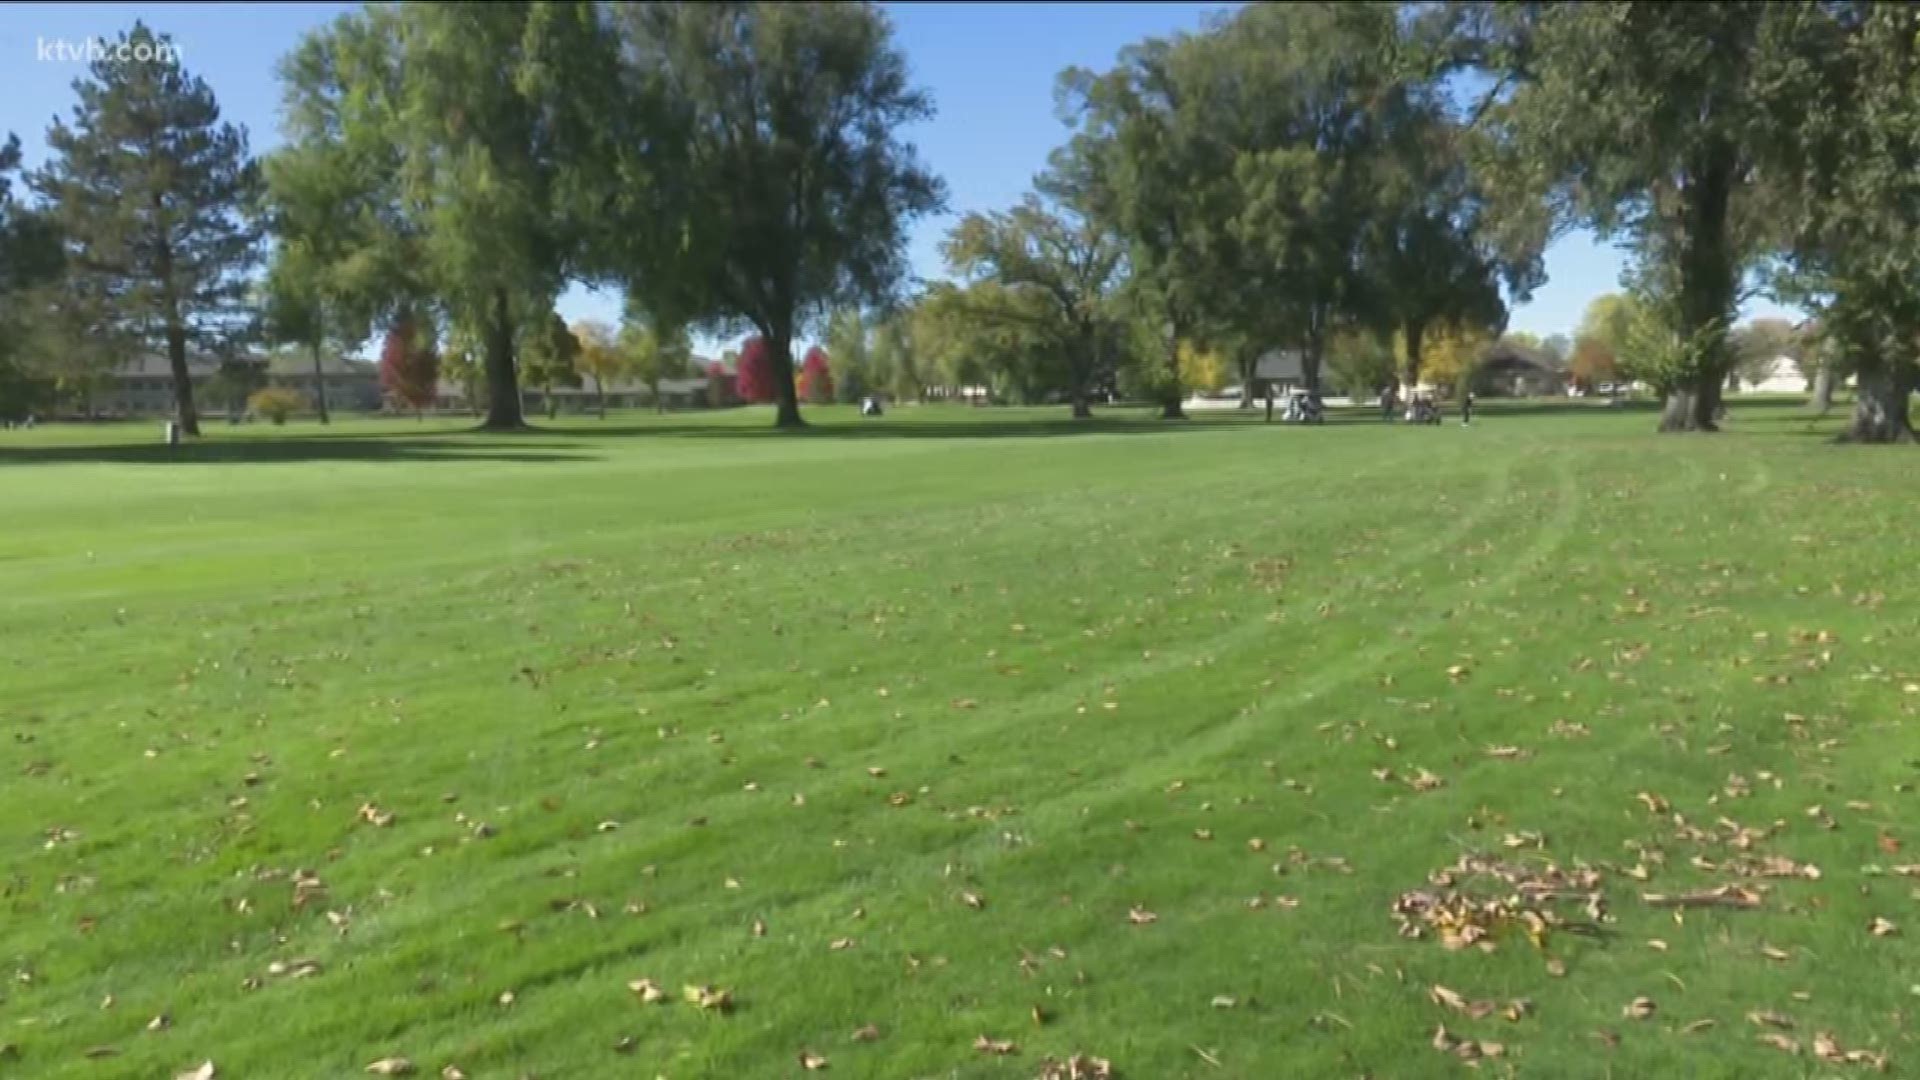 Garden City Mayor Weighs In On Plantation Country Club